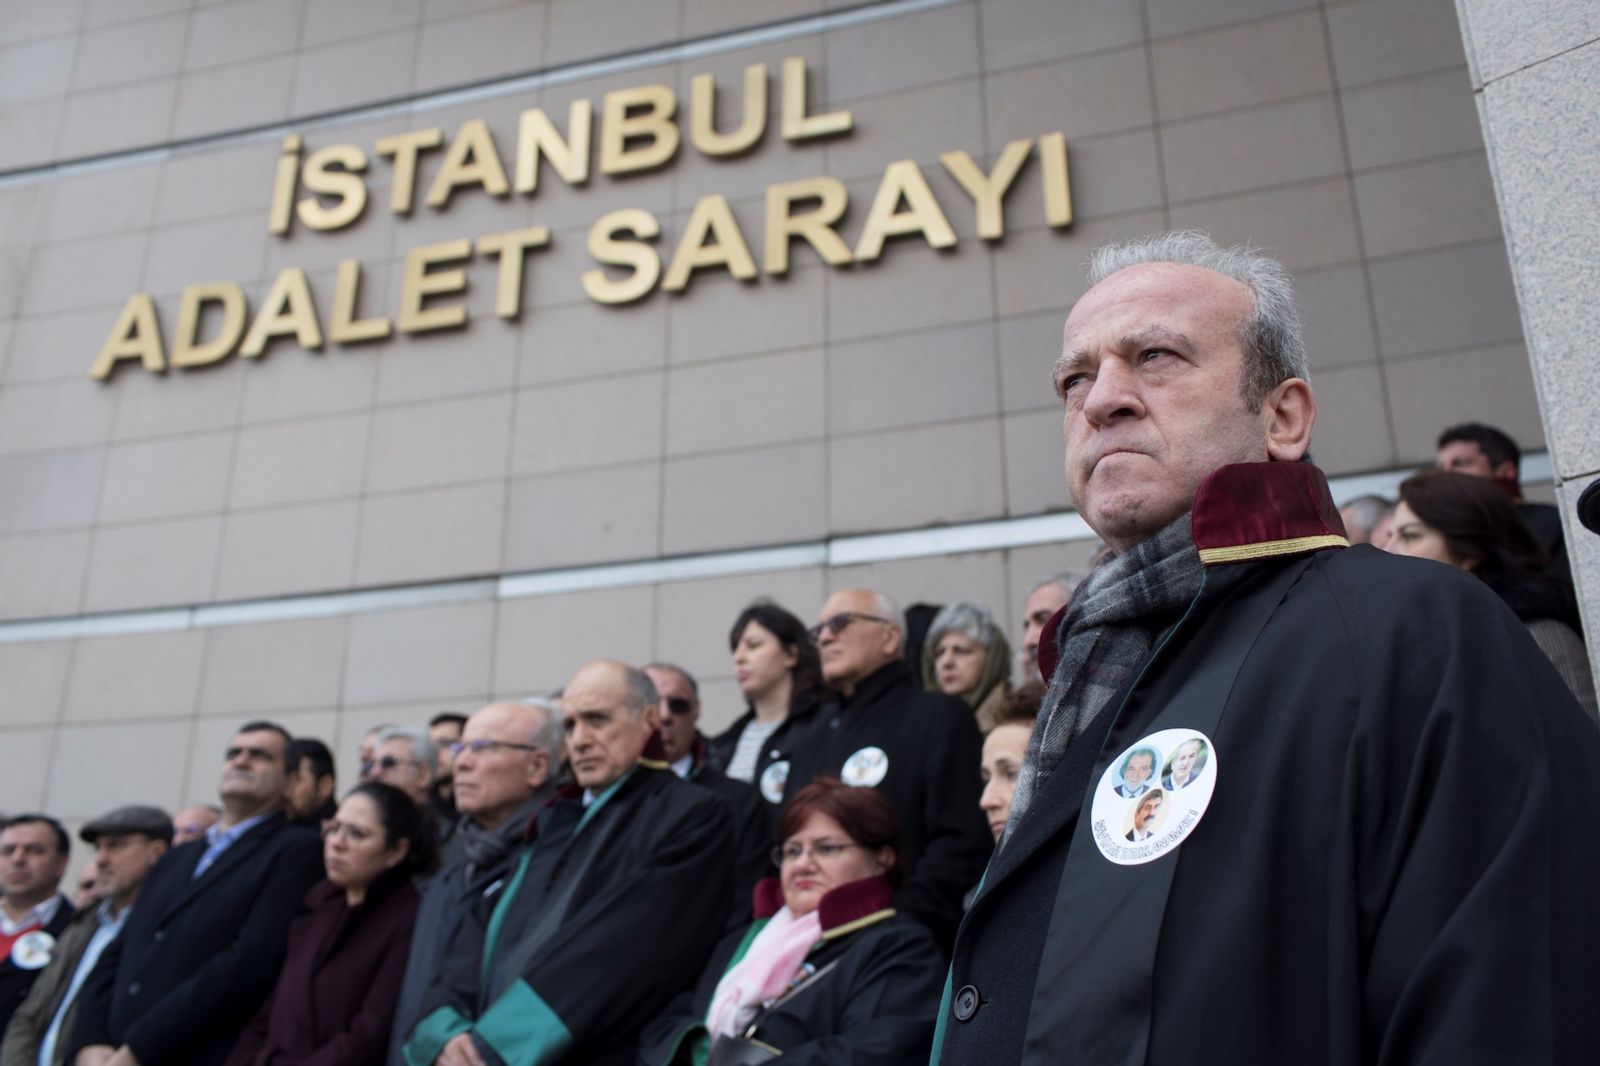 Early parole reforms in Turkey put political prisoners at increased risk